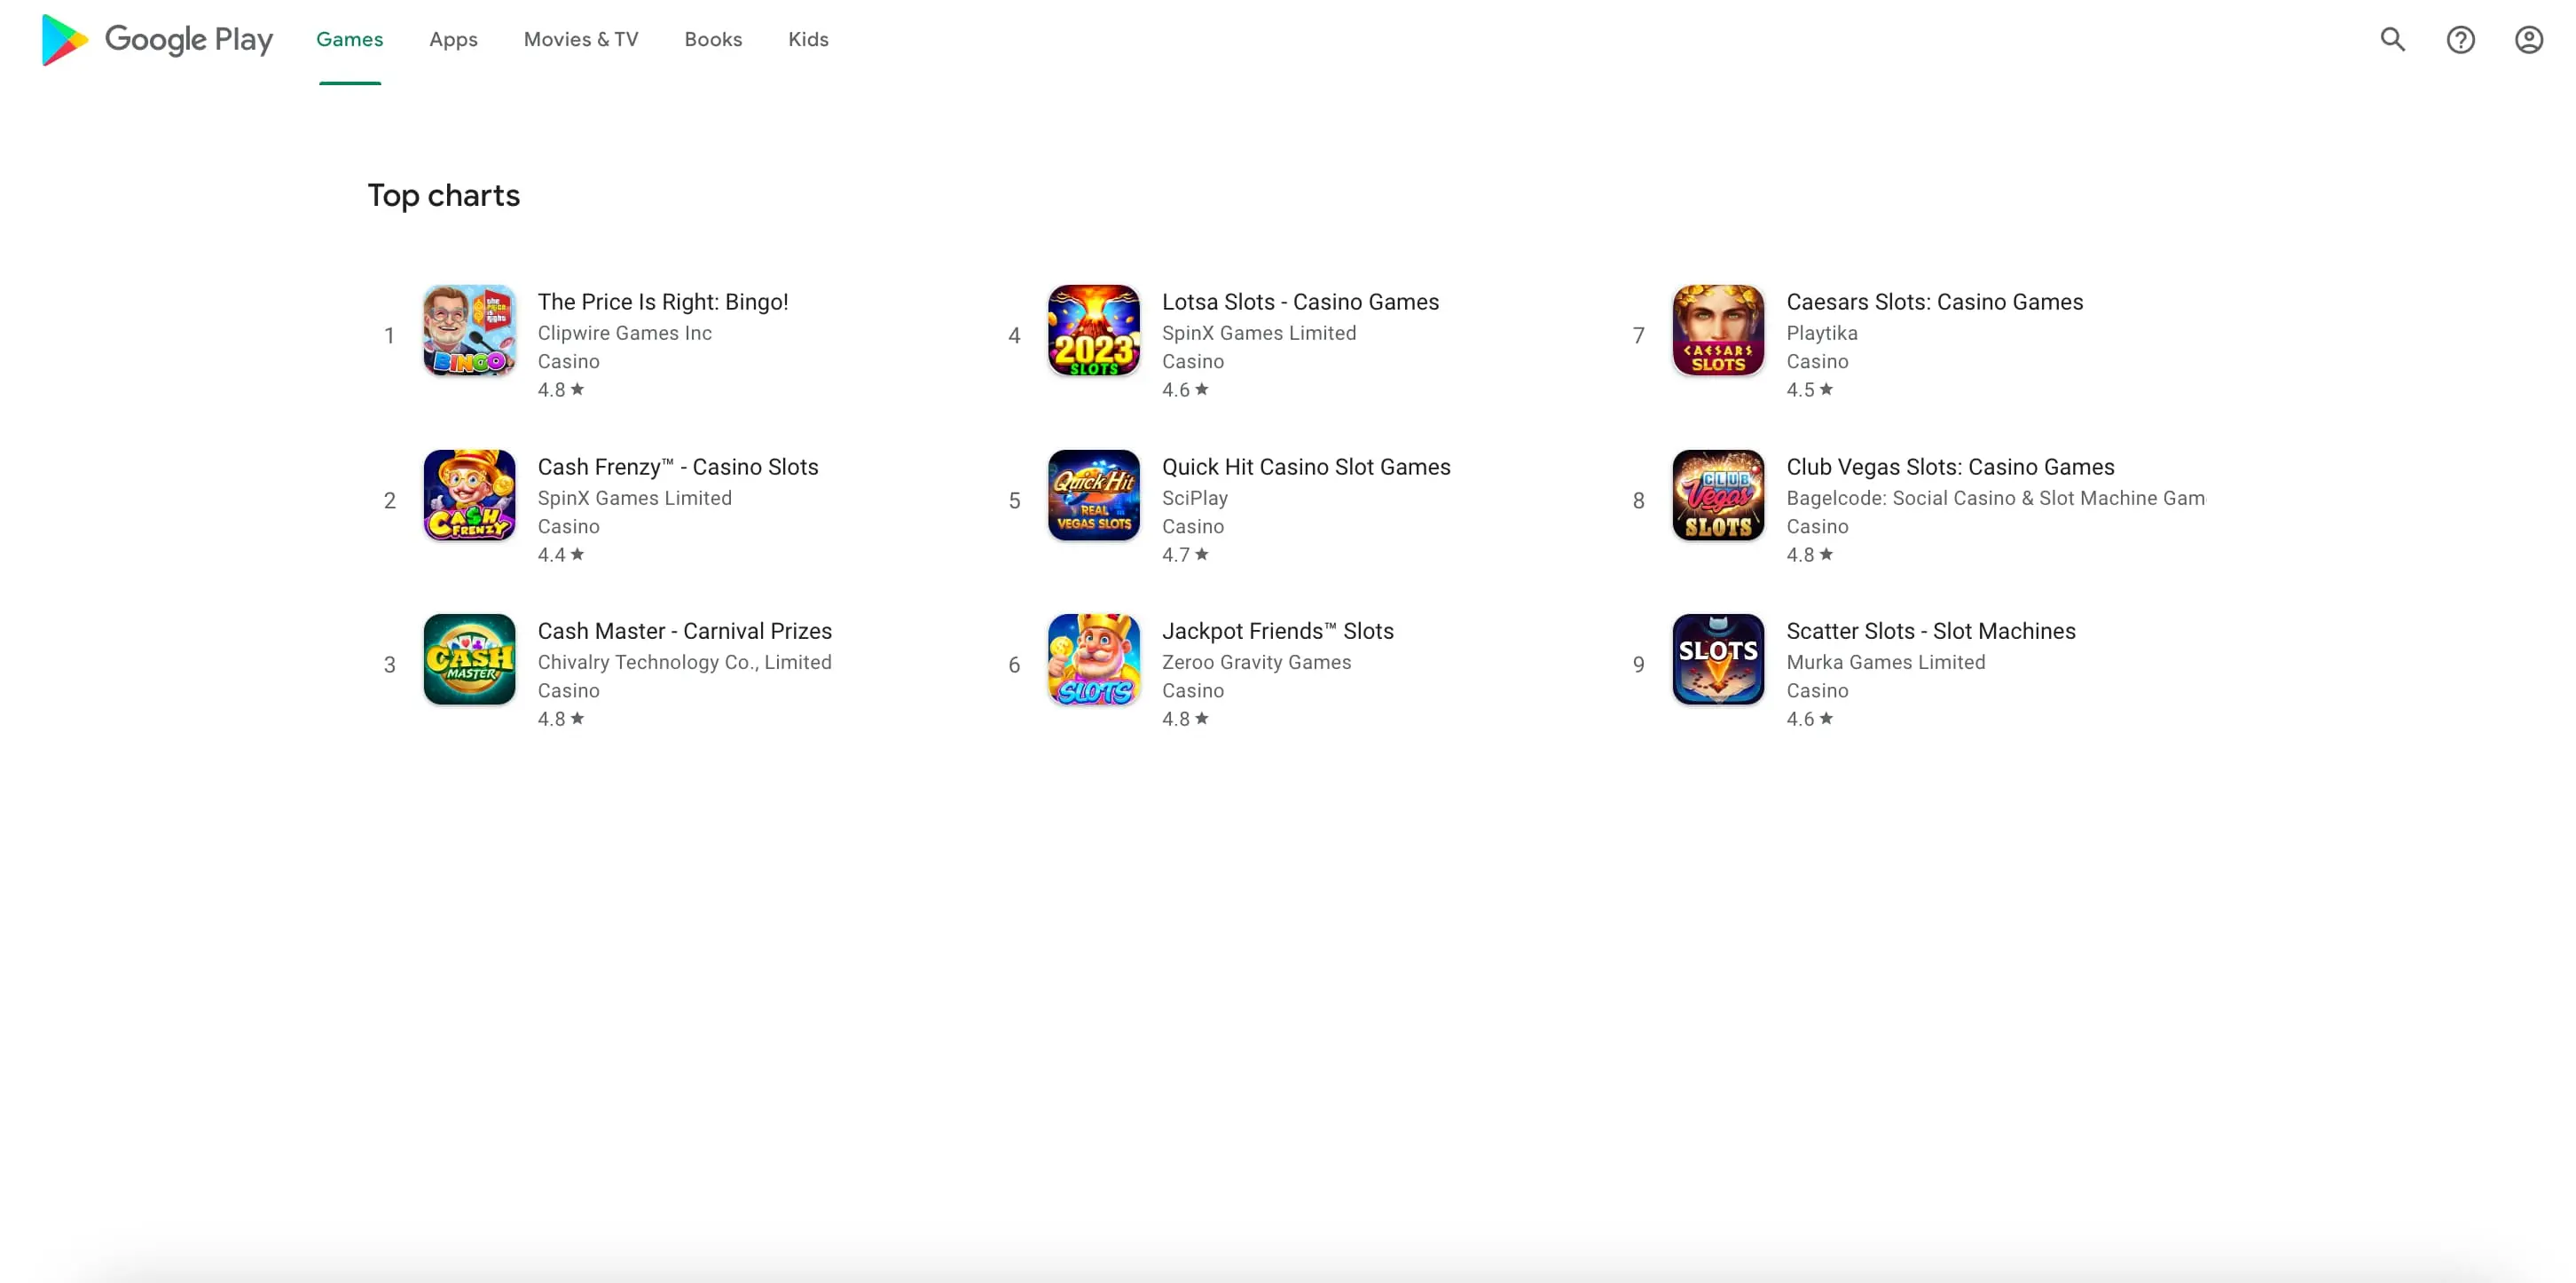 Top Charts results overview for Google Play Games with games_category(Category Search)